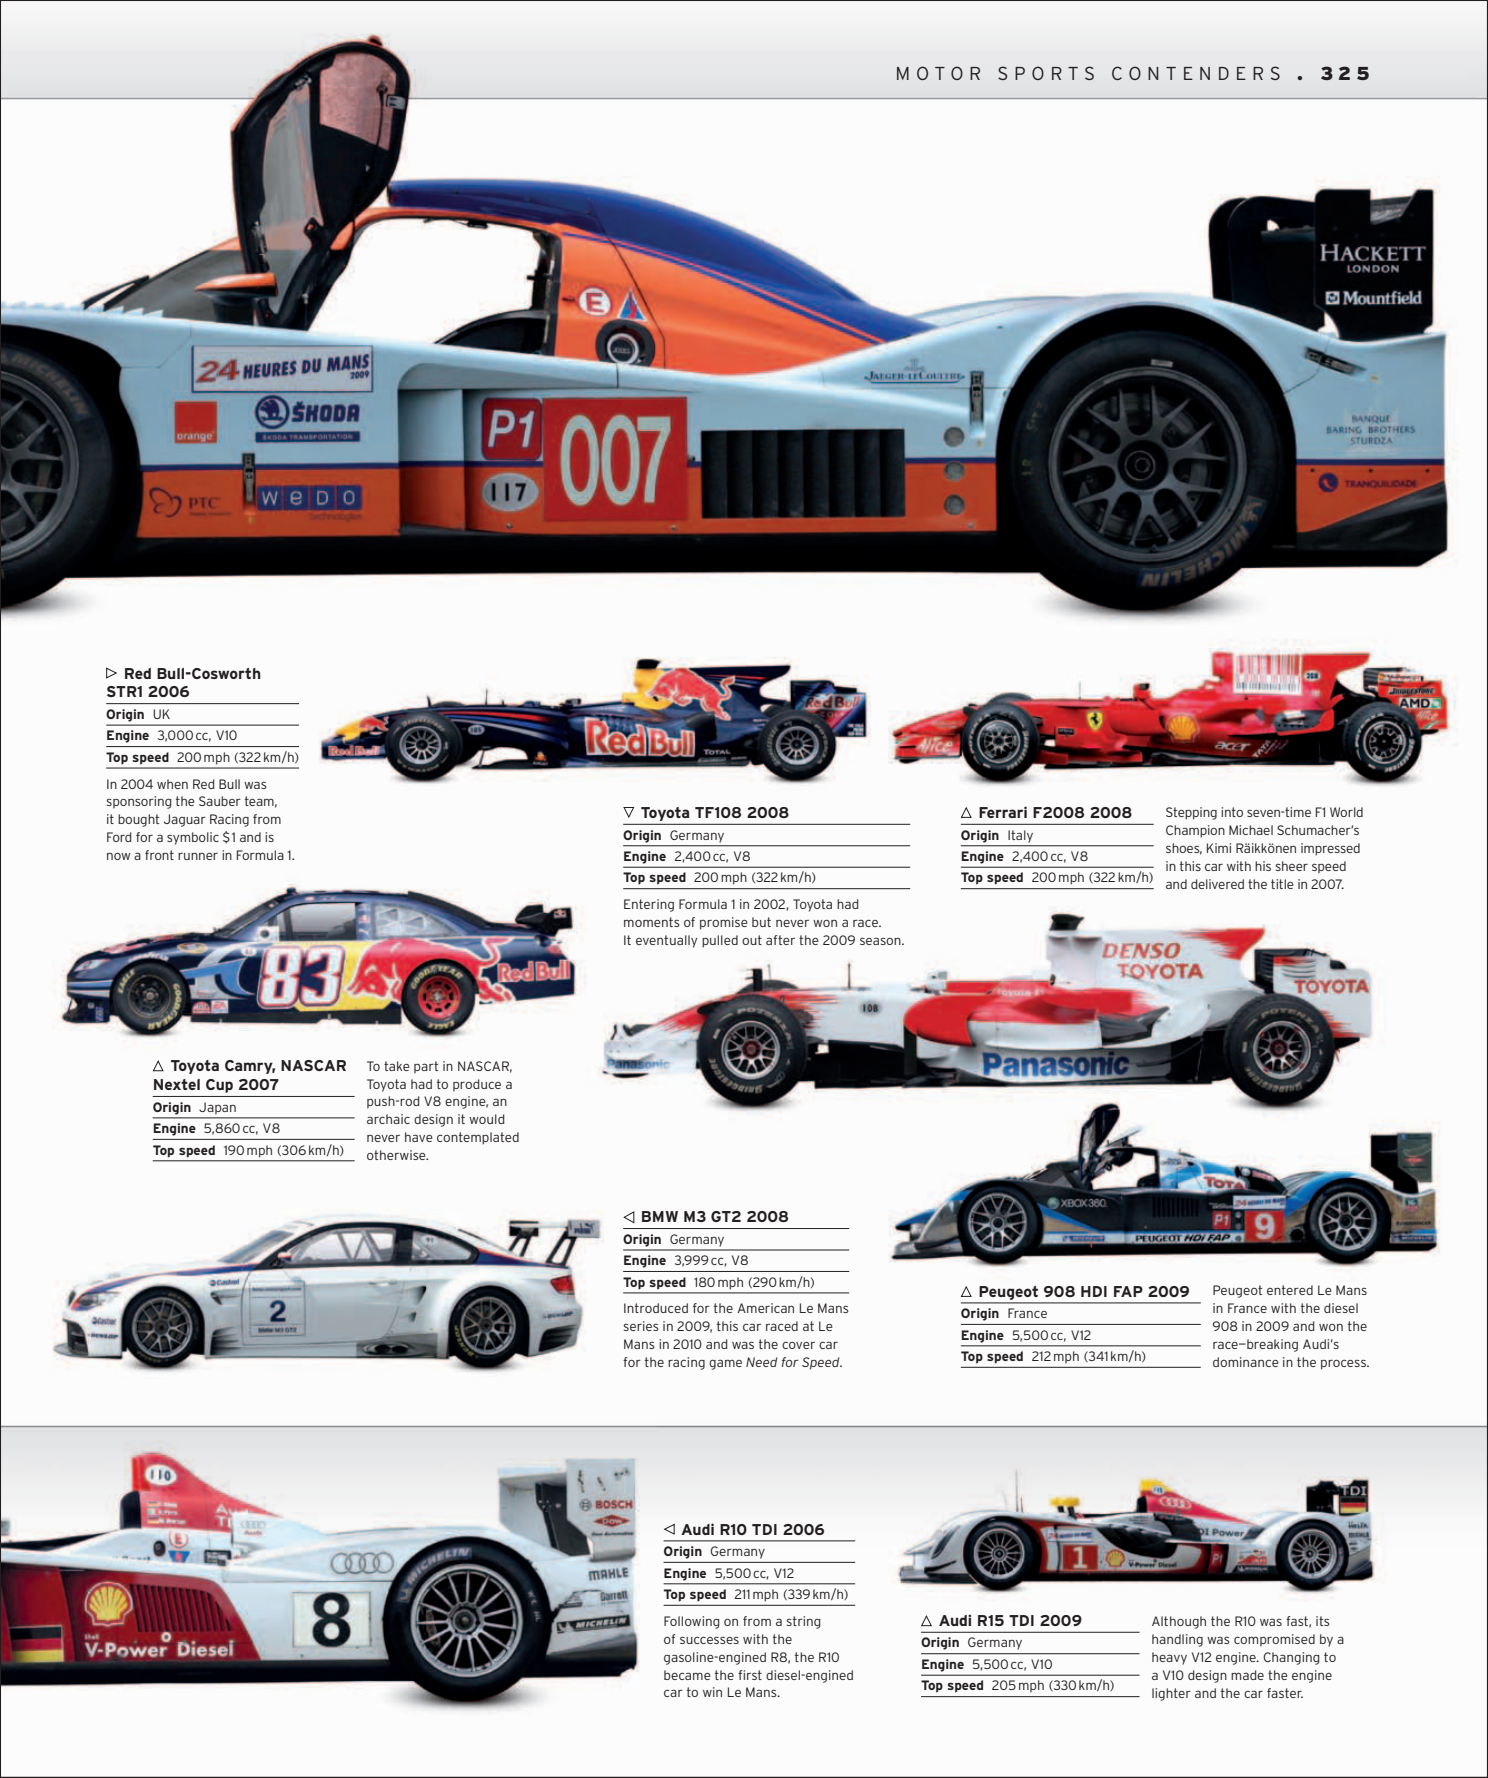 Car%20-%20The%20Definitive%20Visual%20History%20of%20the%20Automobile_327.png